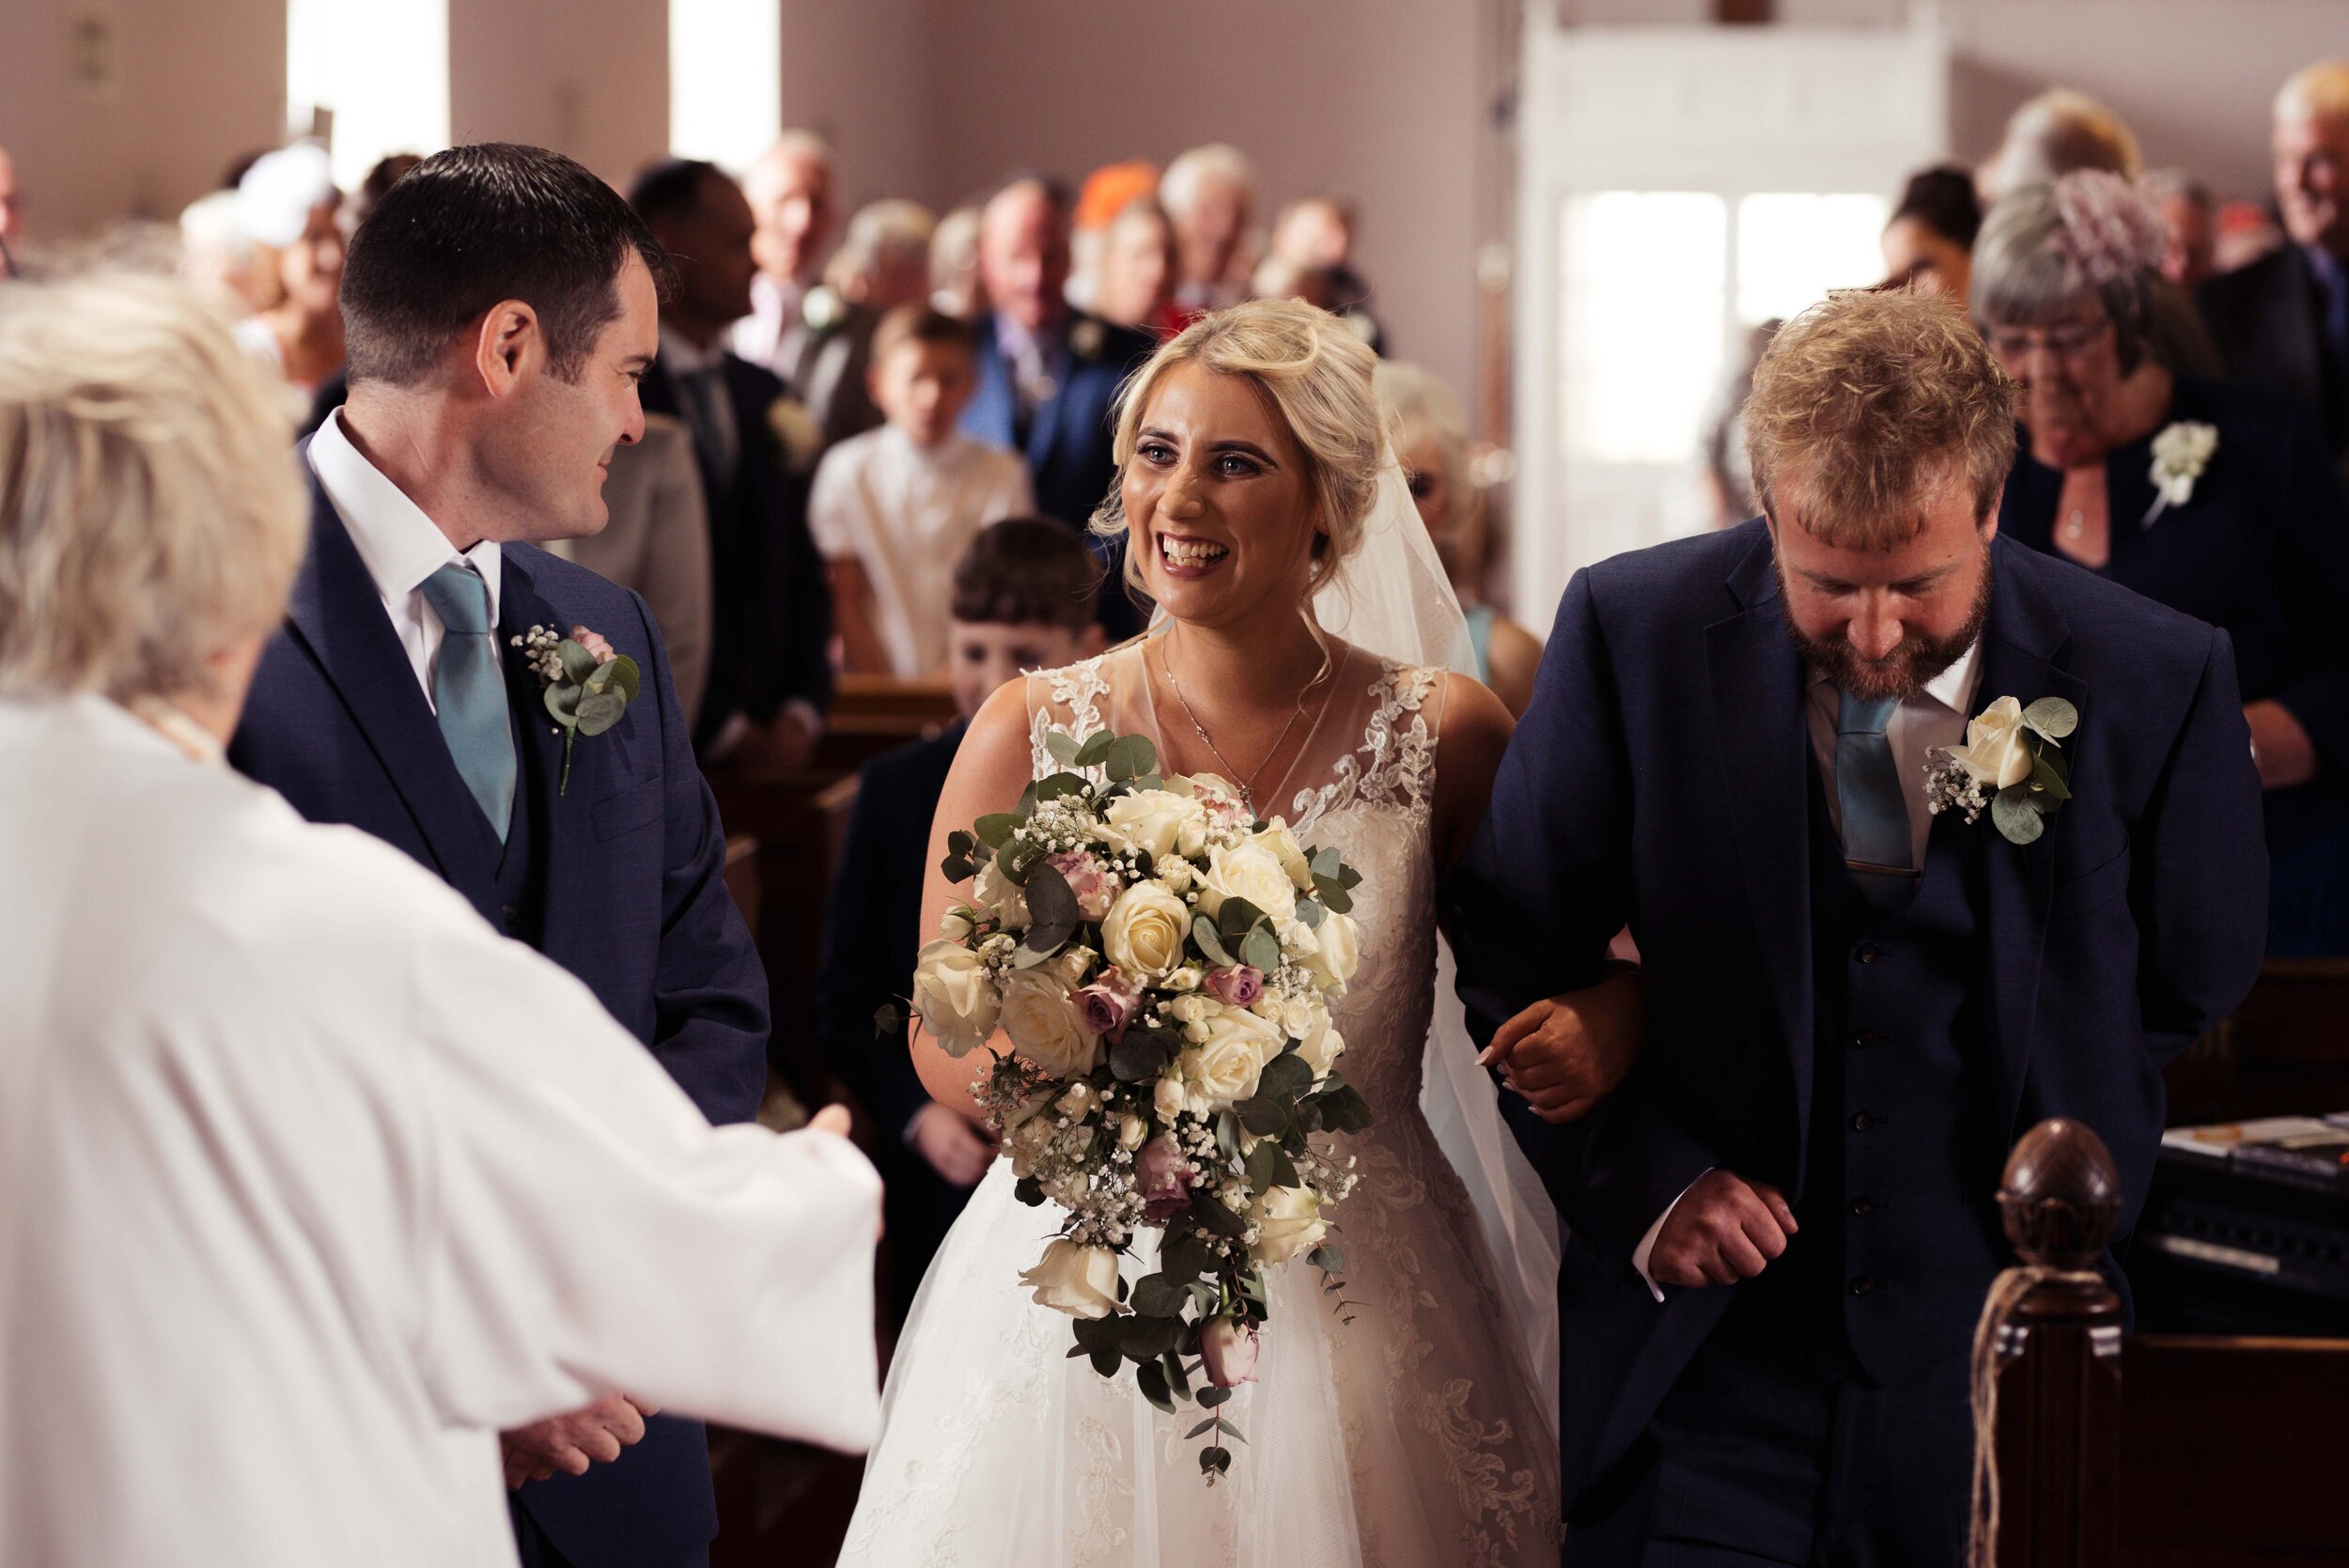 Bride sees her smiling groom for the first time in the church